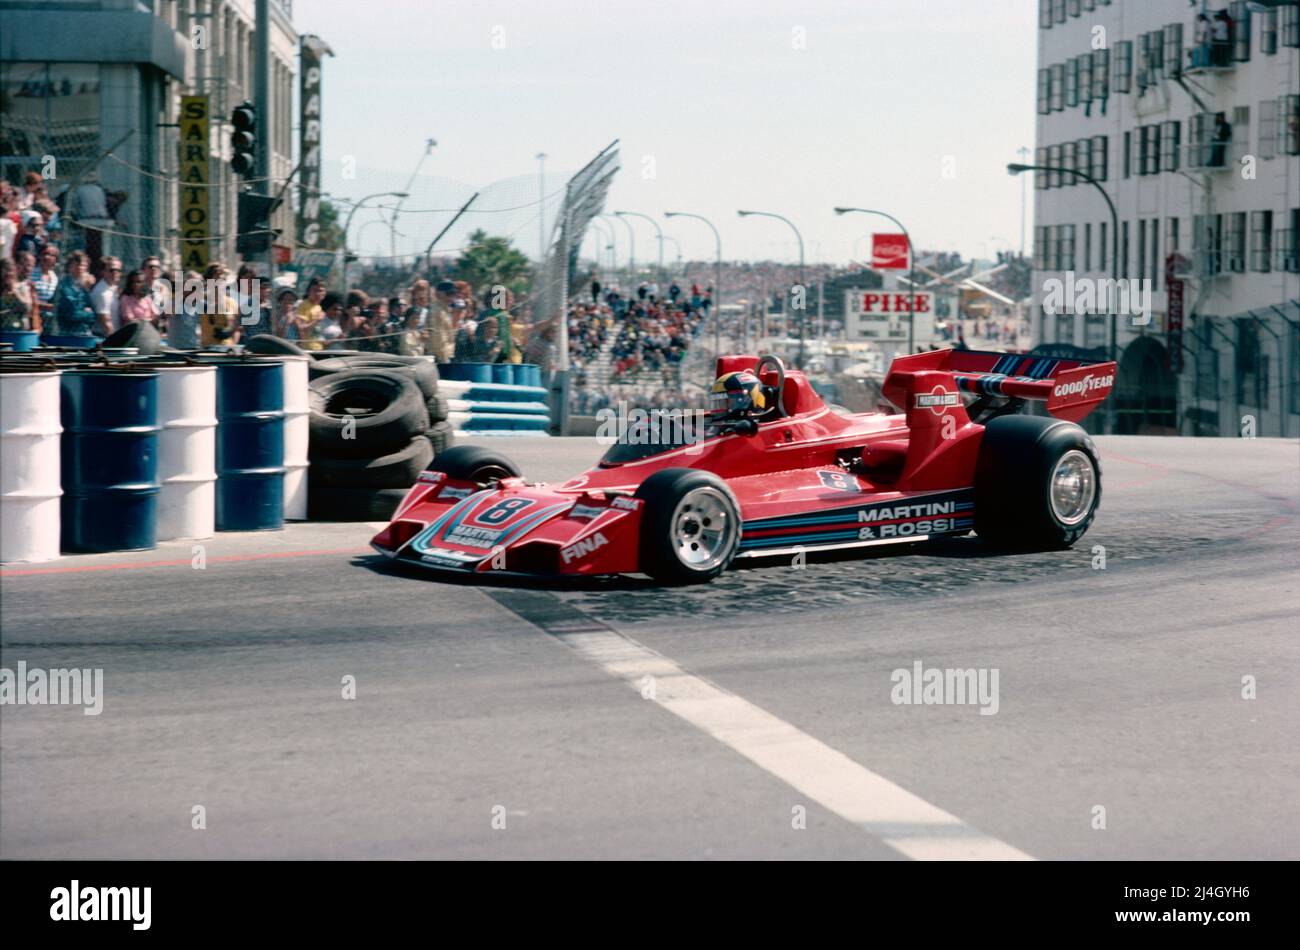 Carlos Pace. 1976 United States Grand Prix West Stock Photo - Alamy